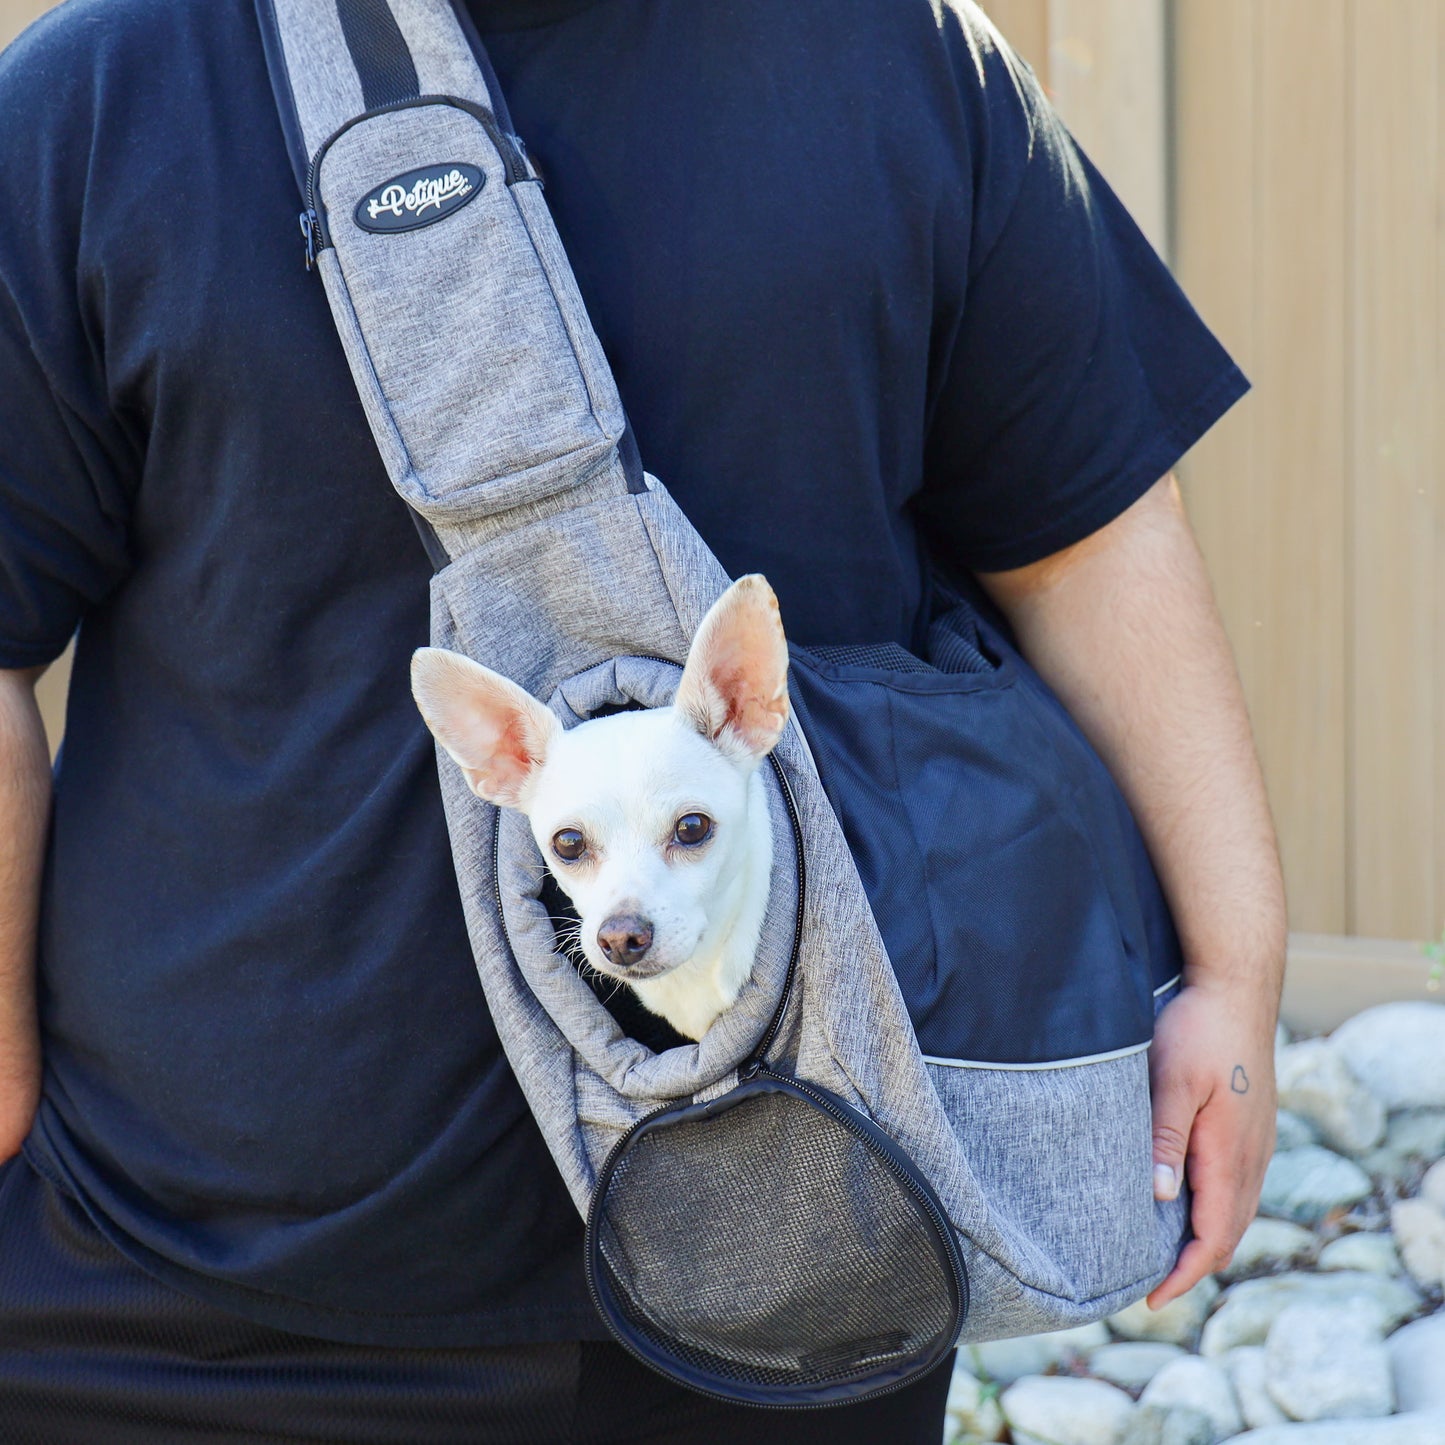 Sling Pet Carrier: Hands-Free, Over-the-Shoulder Design, Mesh Peekaboo Window, Adjustable Leash, Padded Strap, Patented Pee Pad Insert, Reflective Lining, Folds Flat, Secure Zipper Pocket, Sturdy Board for Dogs, Cats, Small Animals, Supports up to 22 LBS